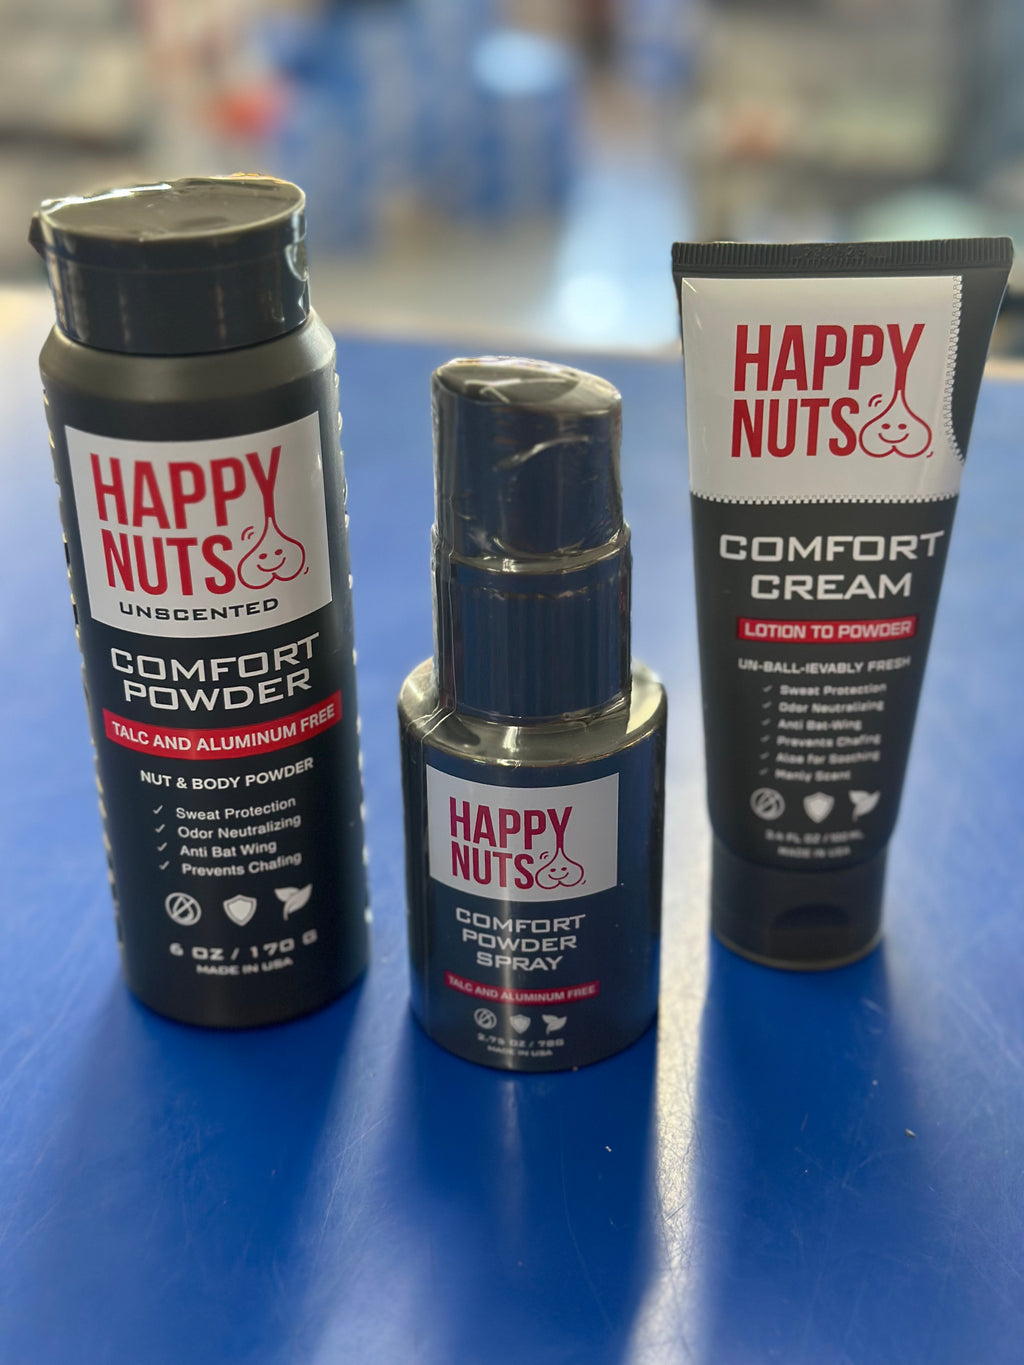 Happy Nuts l Comfort Powder - Unscented